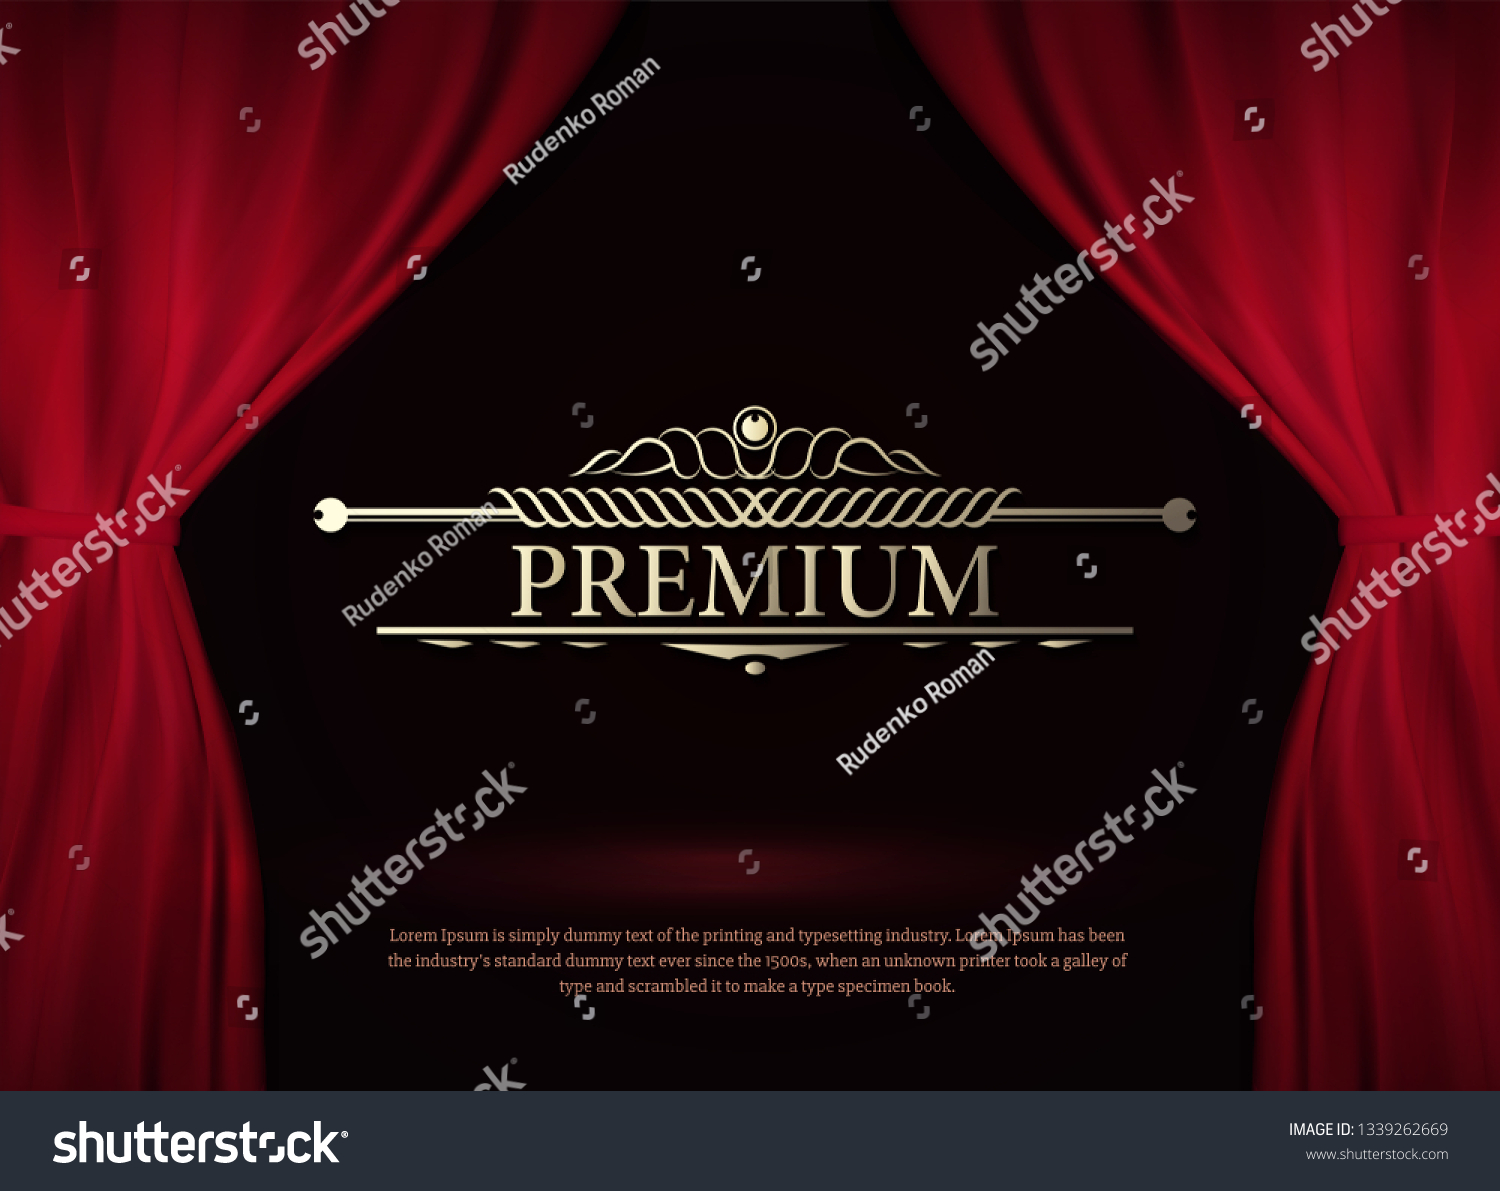 Vector Premium Red Curtains Theater Opera Stock Vector (Royalty Free ...